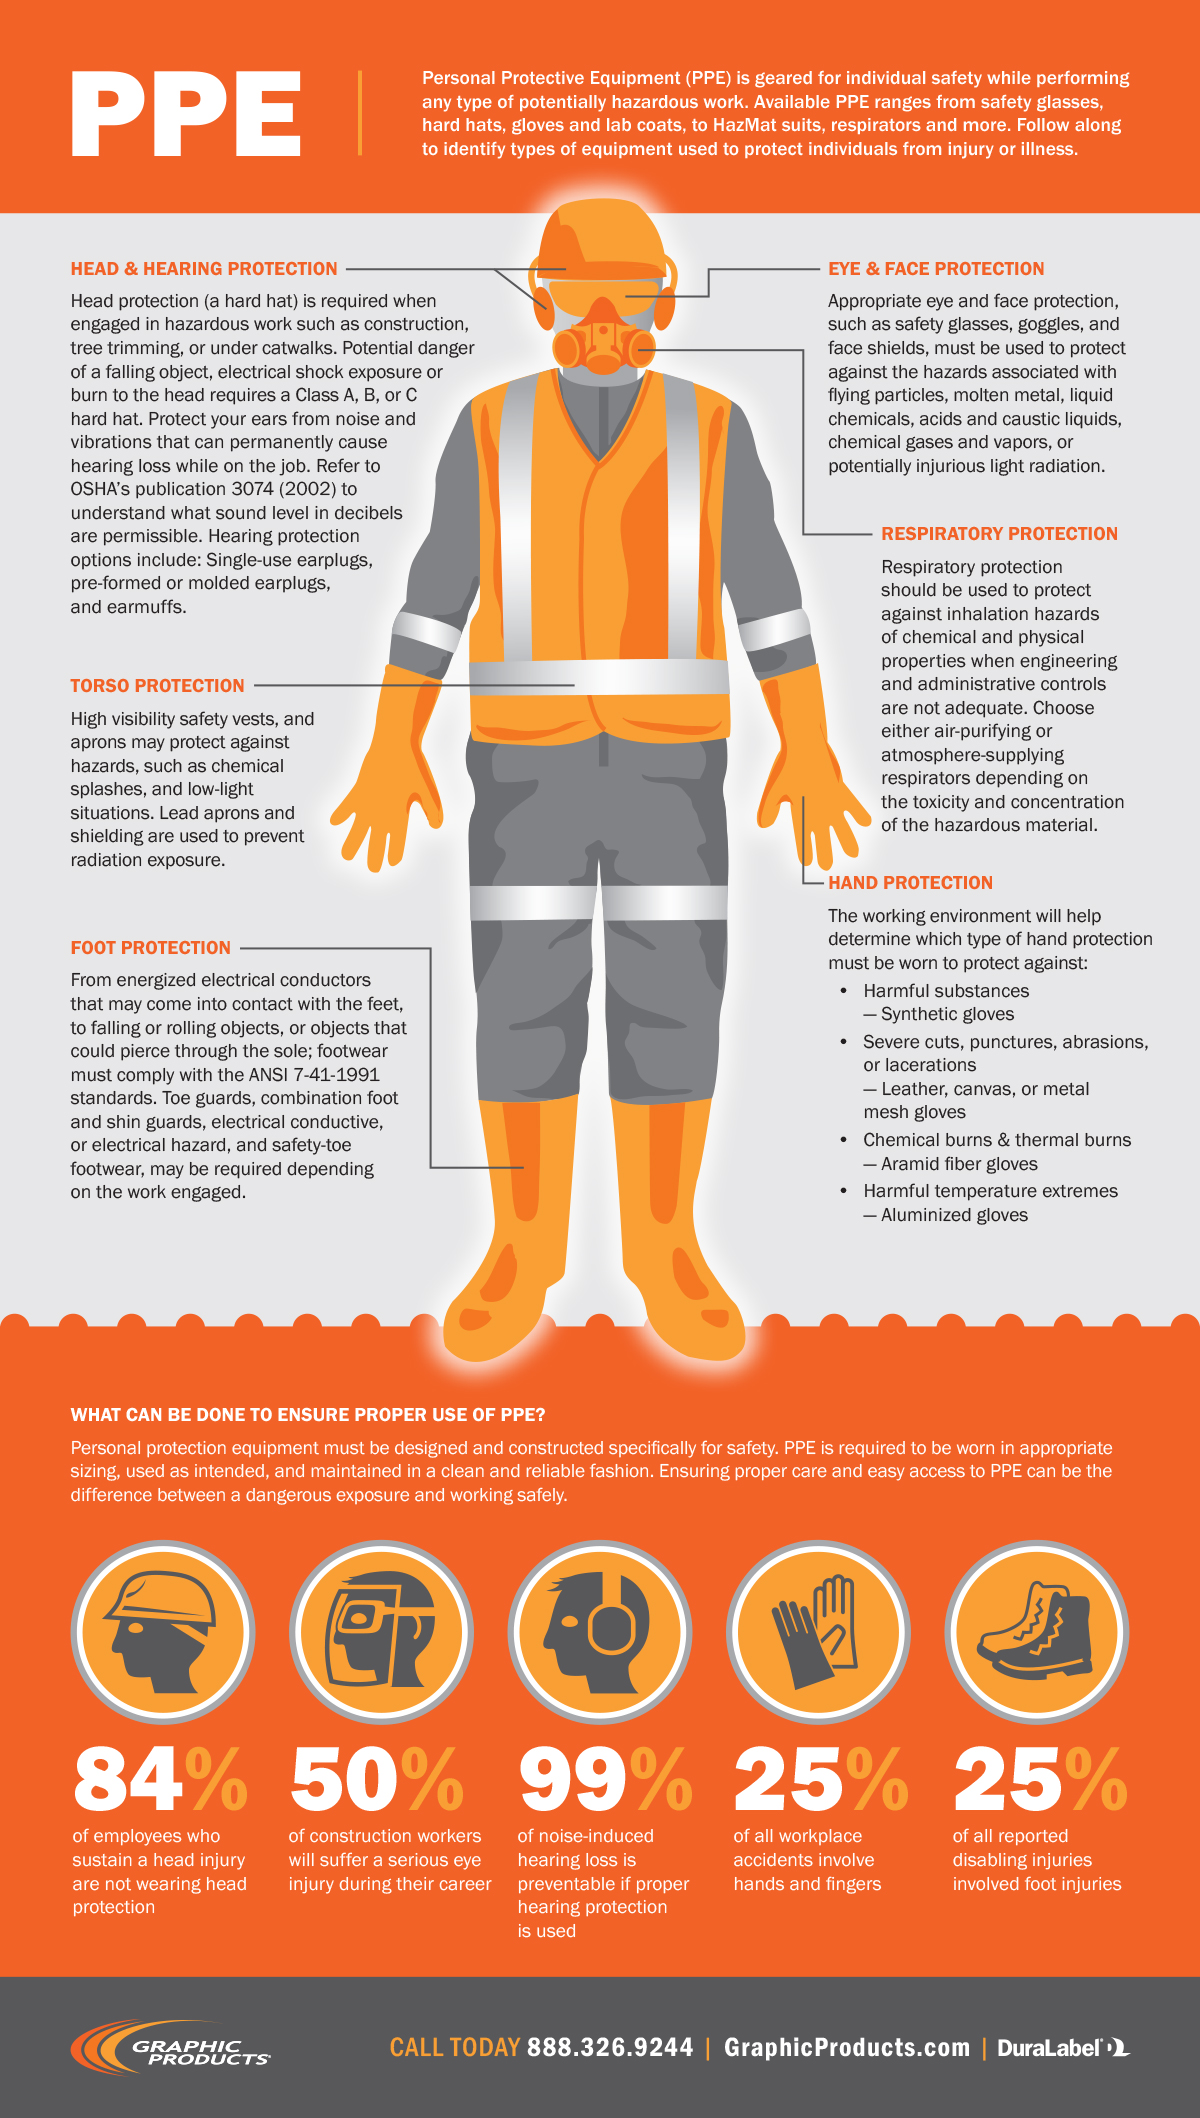 ppe safety tips